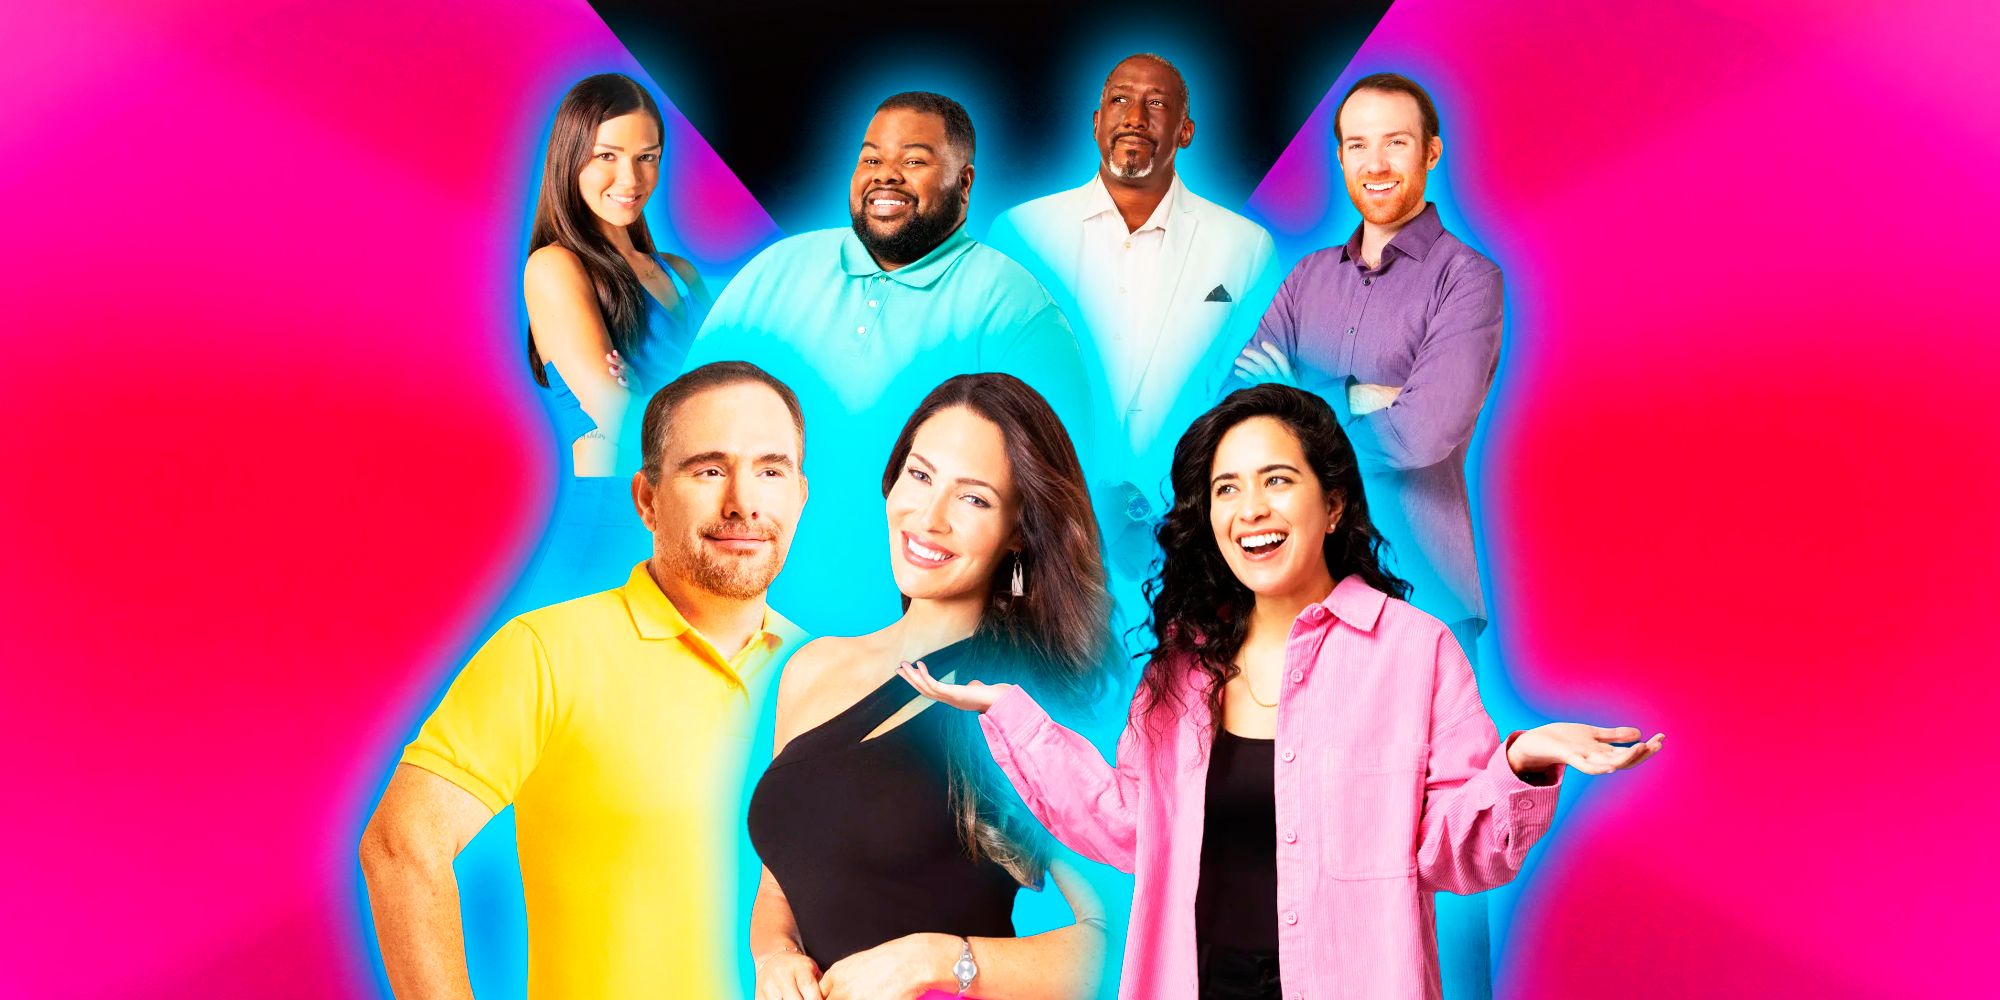  90 Day Fiancé: Before The 90 Days Season 6 group shot of cast with hot pink background